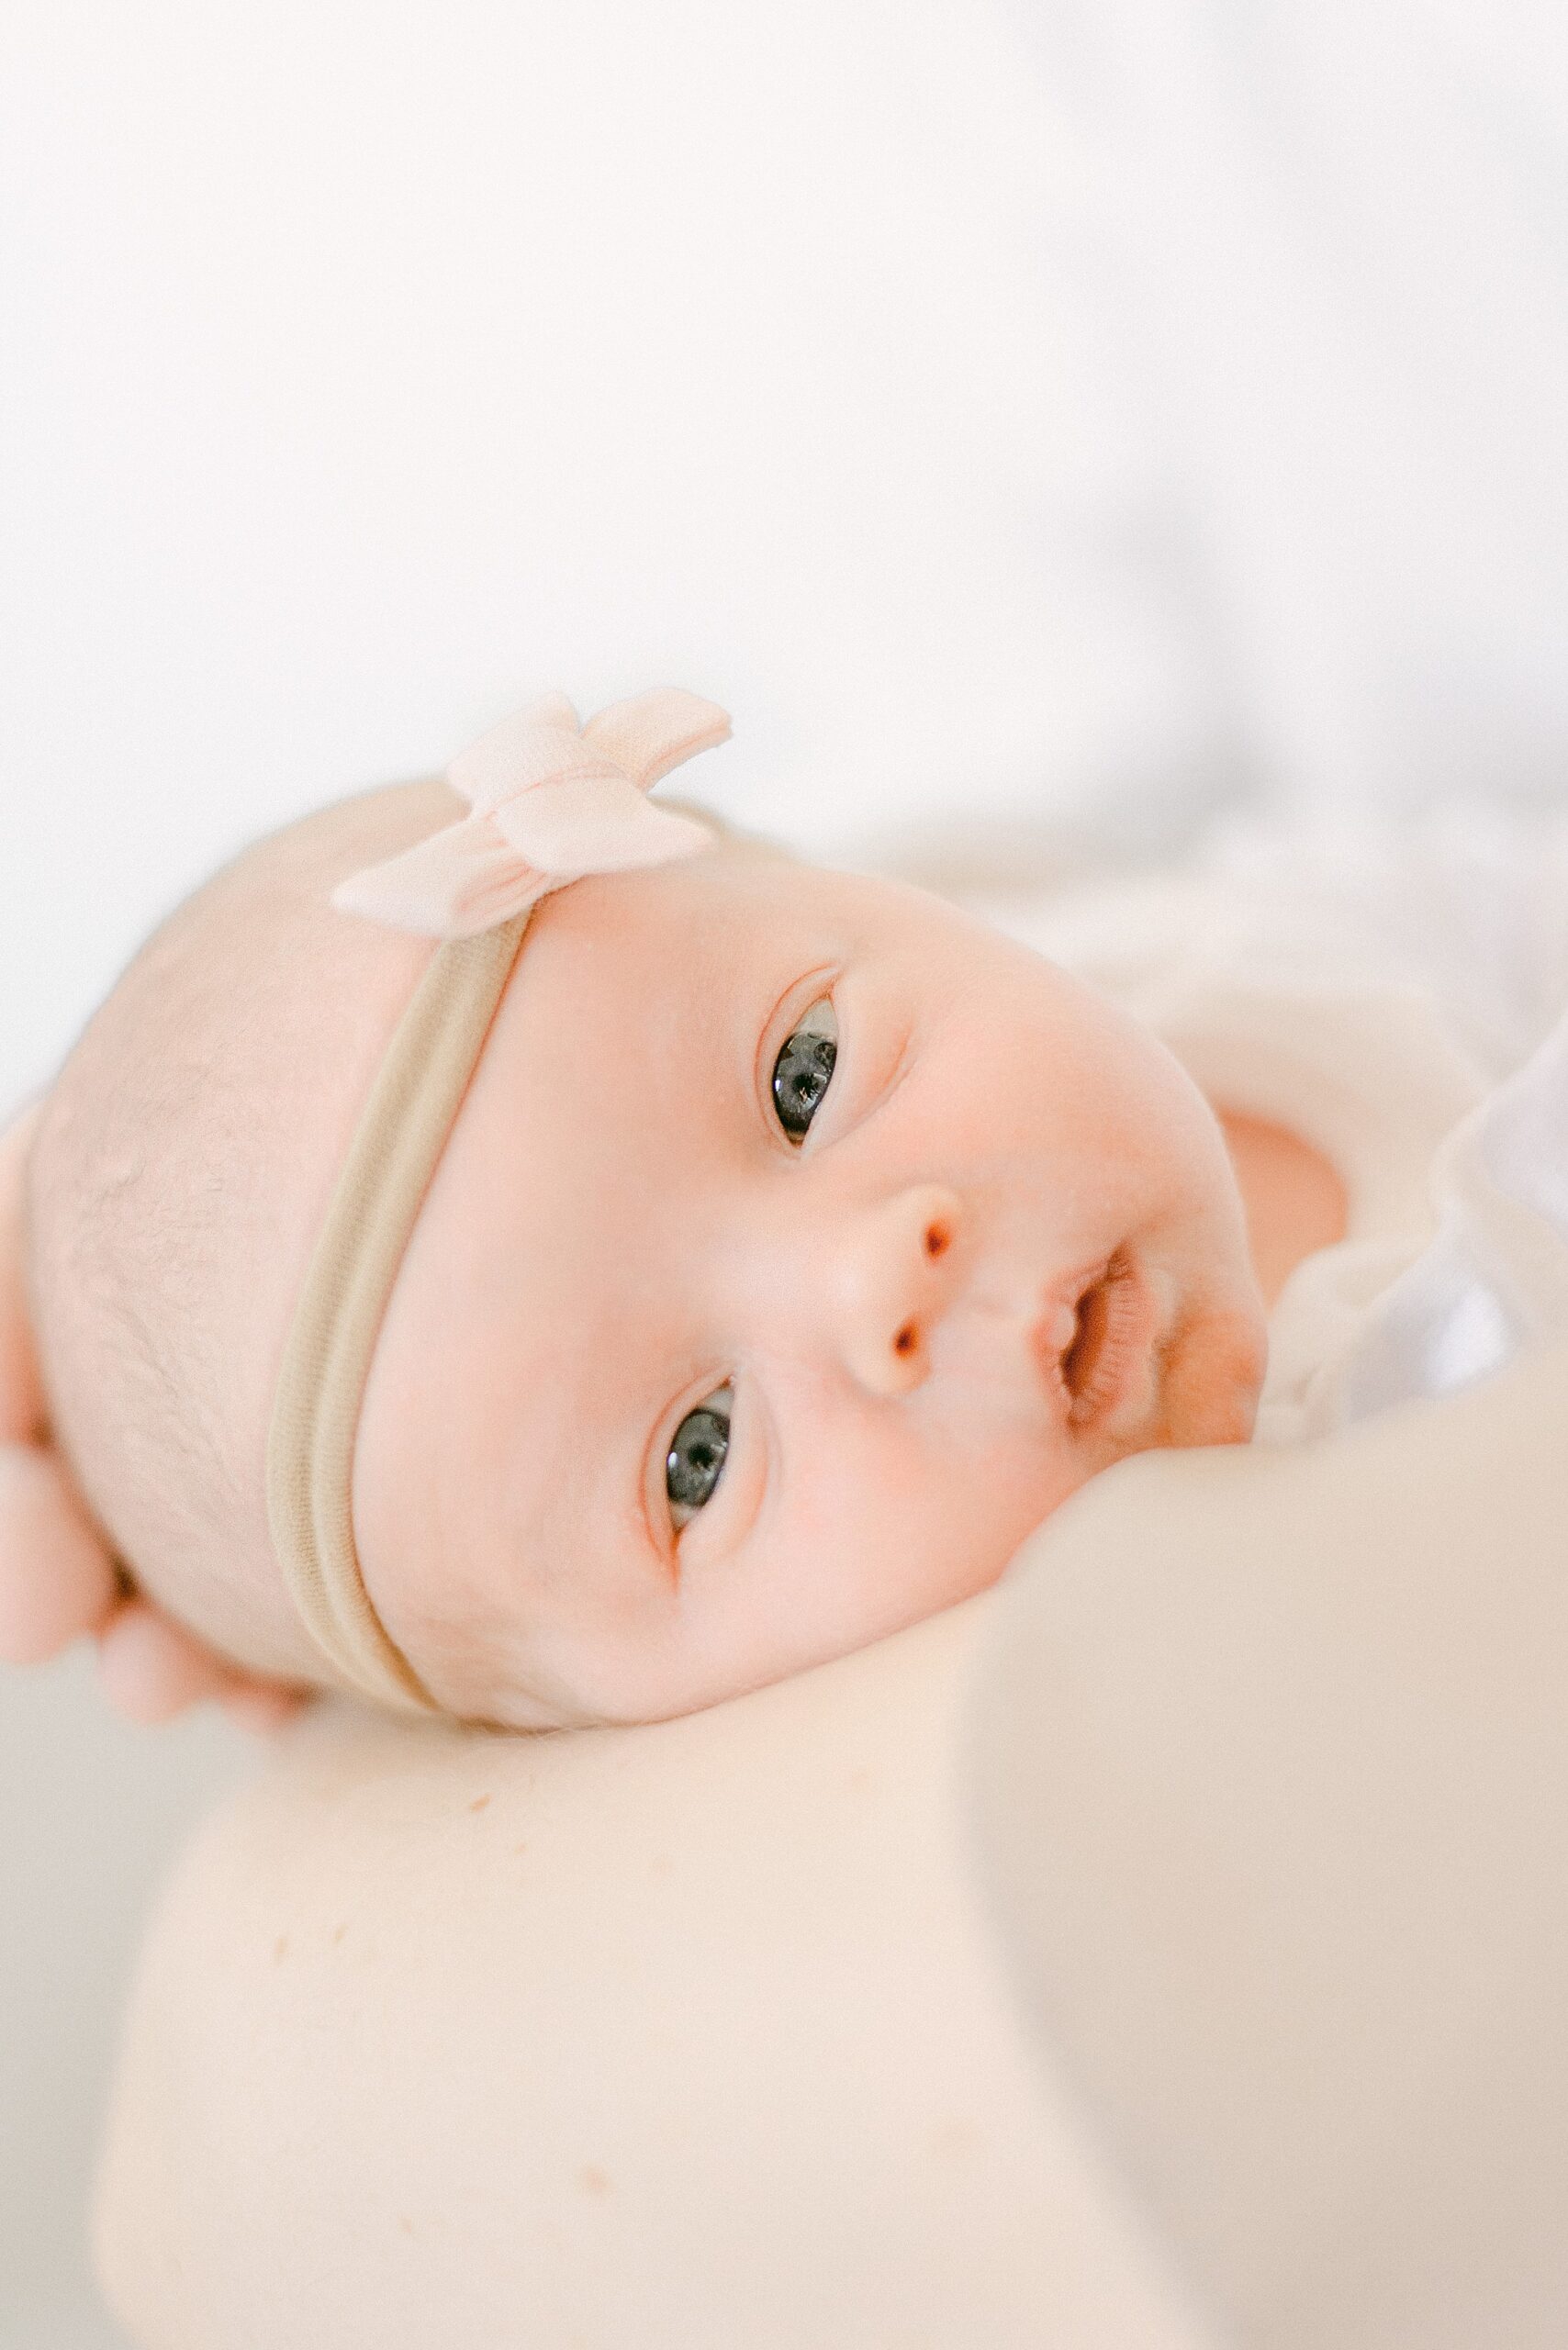 Newborn baby looking at camera while in mom's arms. She's wearing a pink bow headband